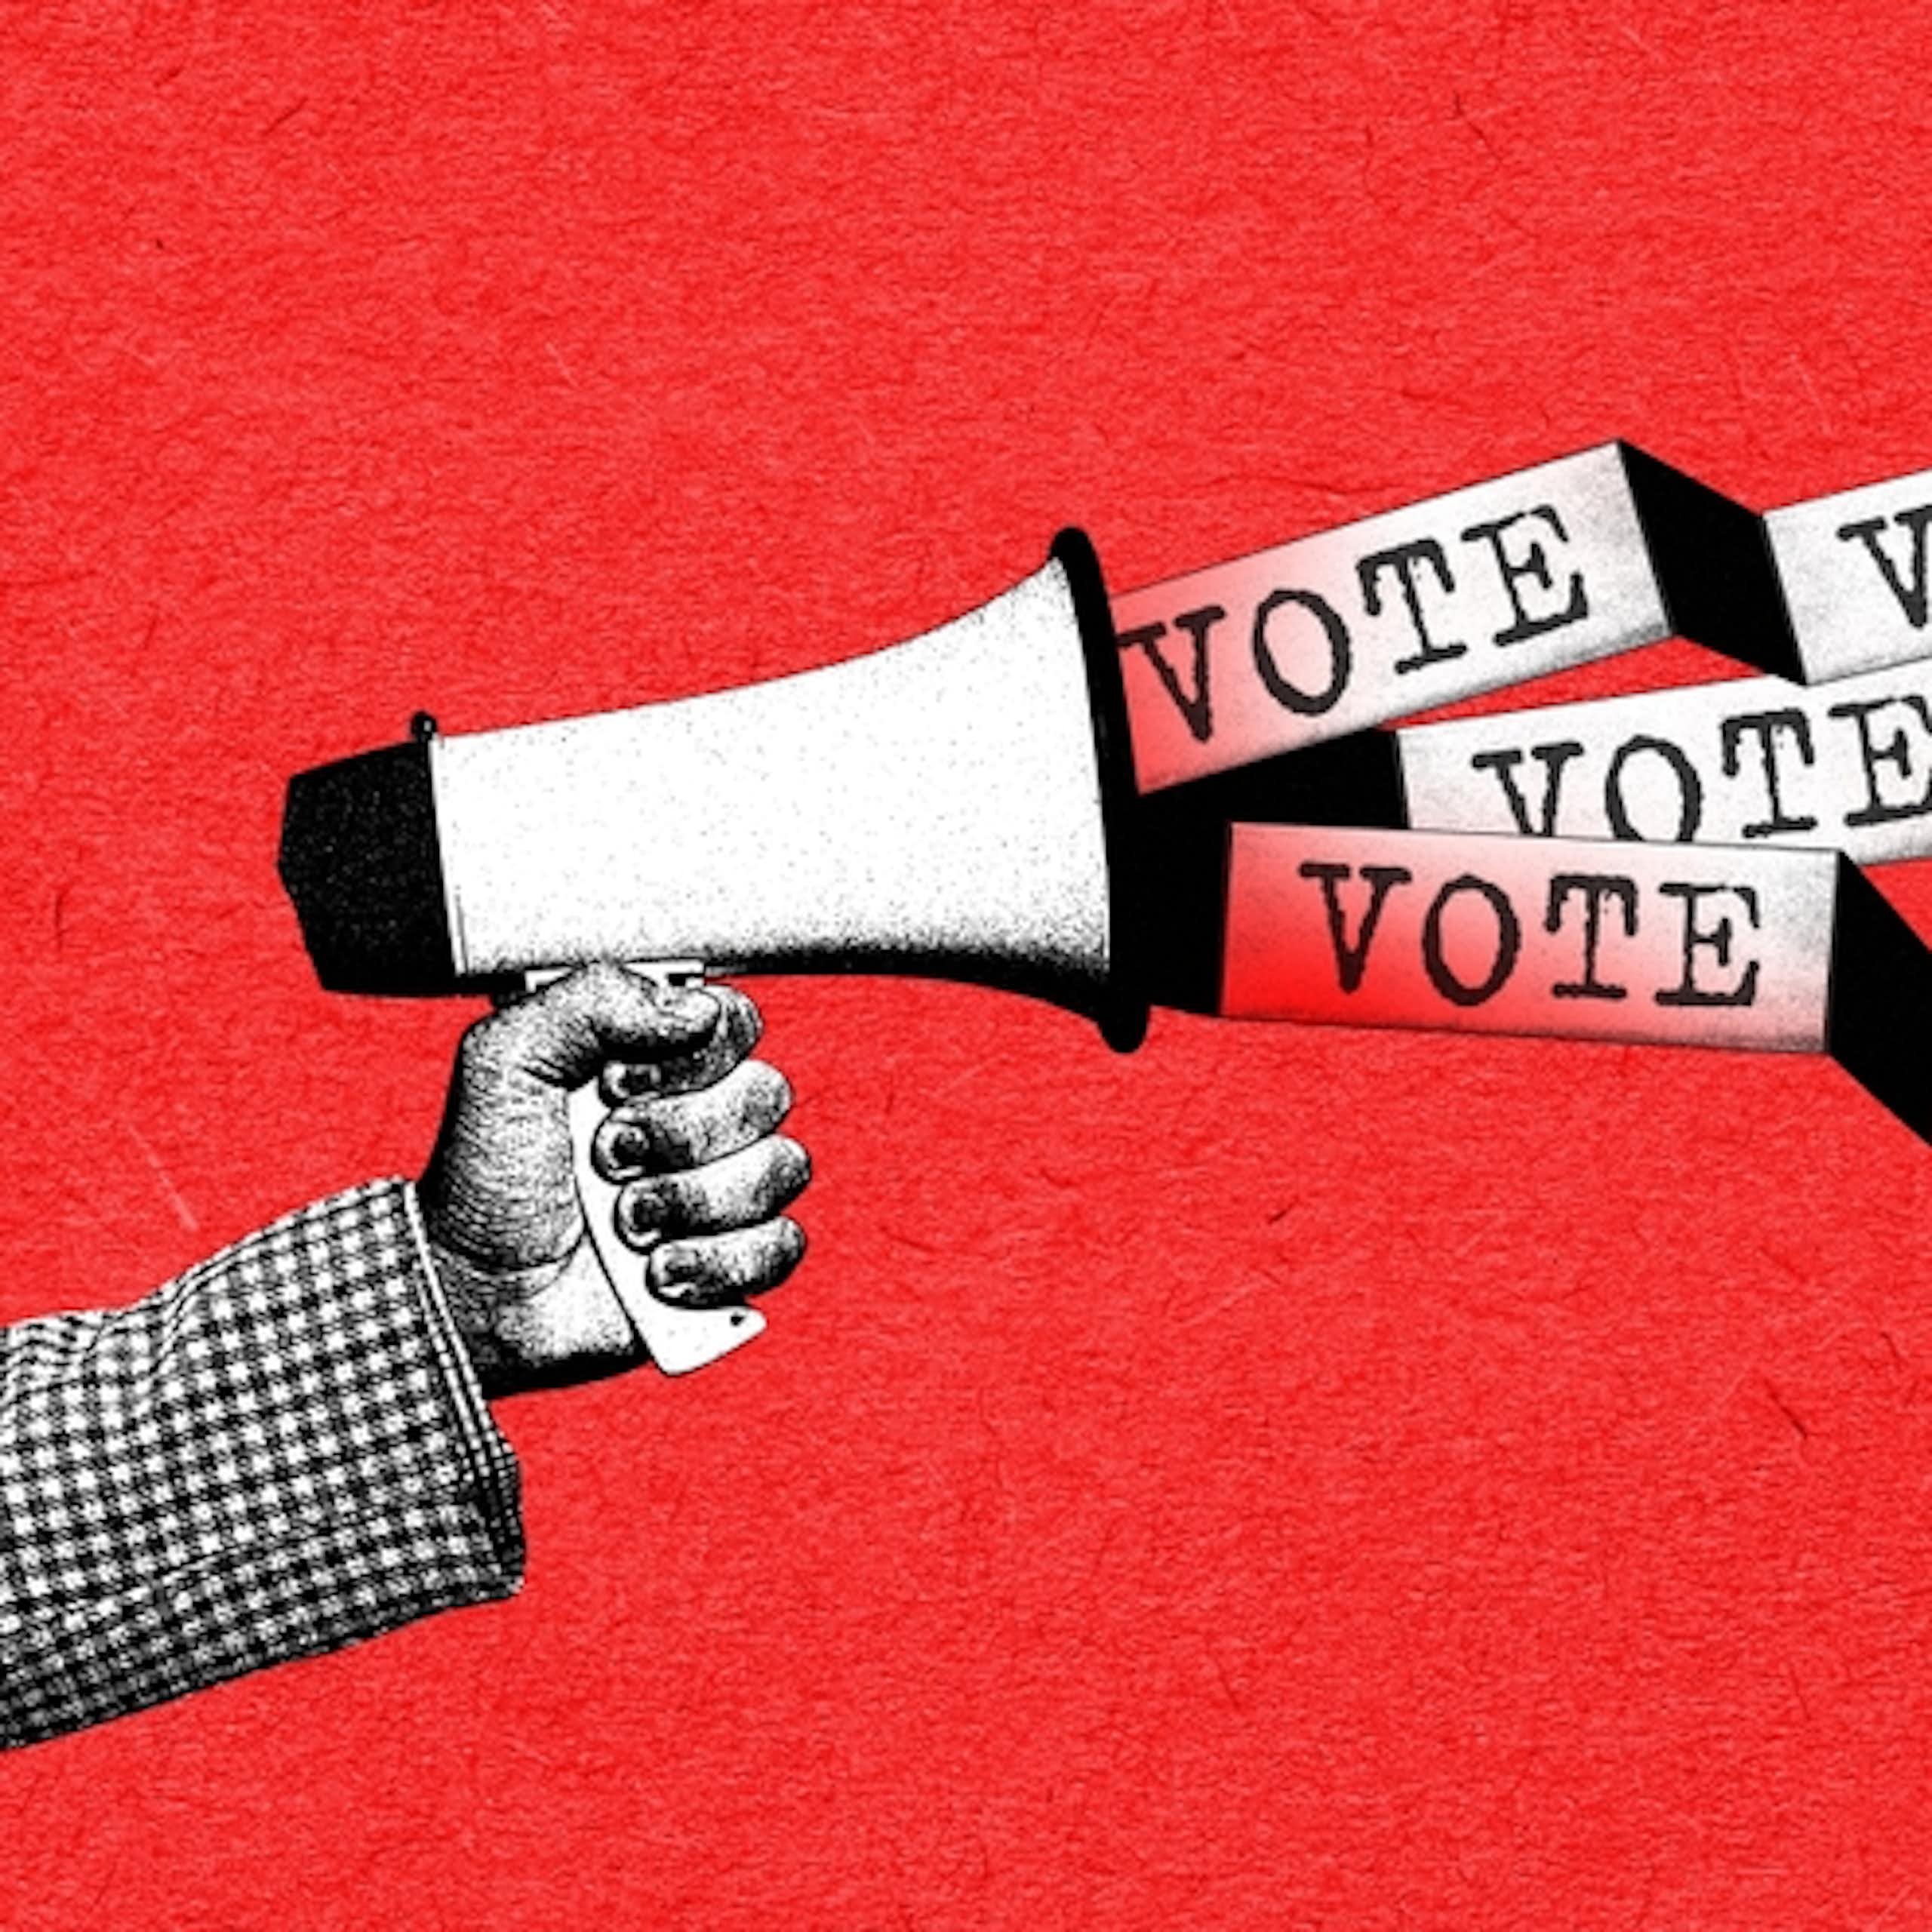 An illustration of a hand holding a megaphone with the words 'vote, vote, vote' flowing out of it.